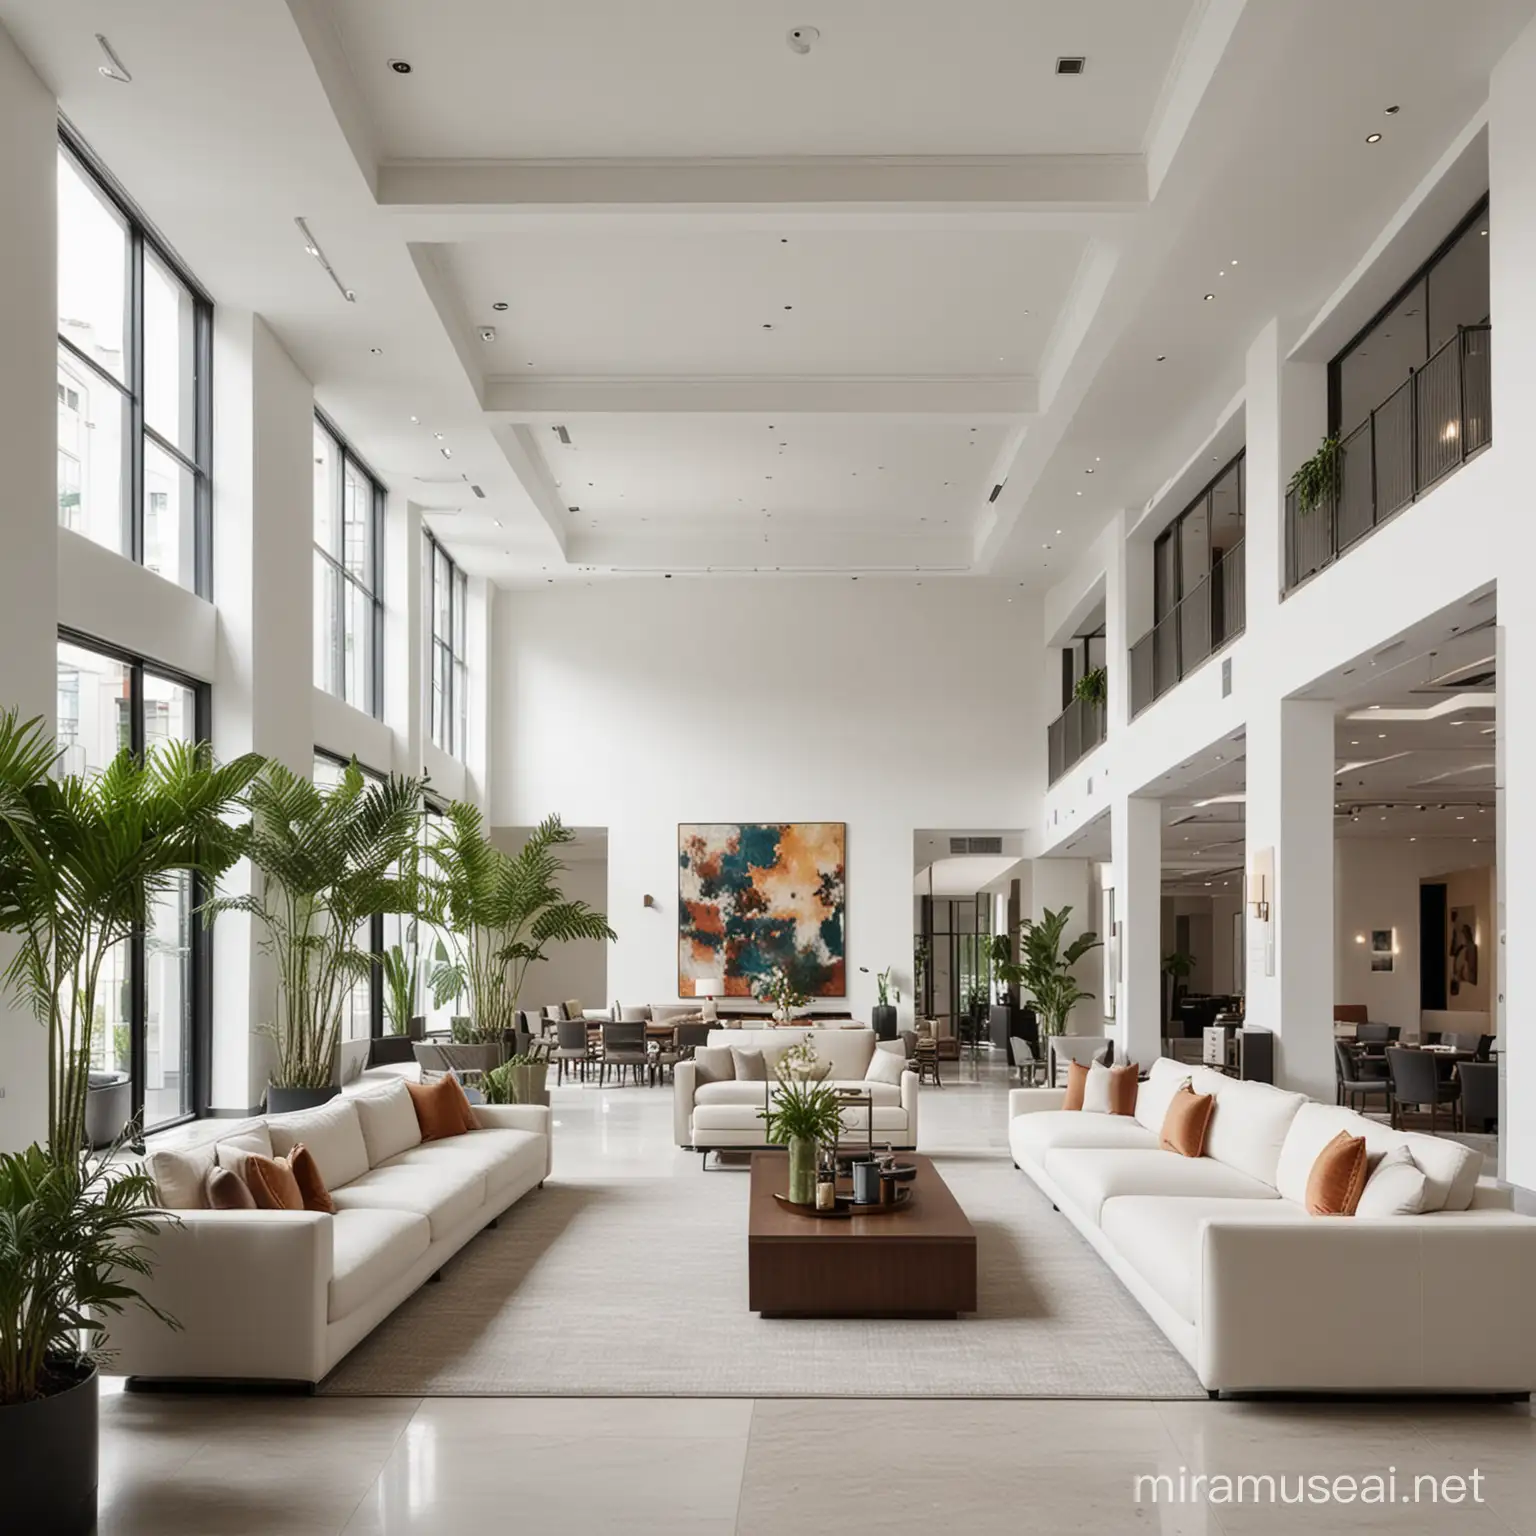 large modern, sleek hotel lobby with white walls, large windows, and coffered ceilings. large plants throughout the place with two L shaped couches